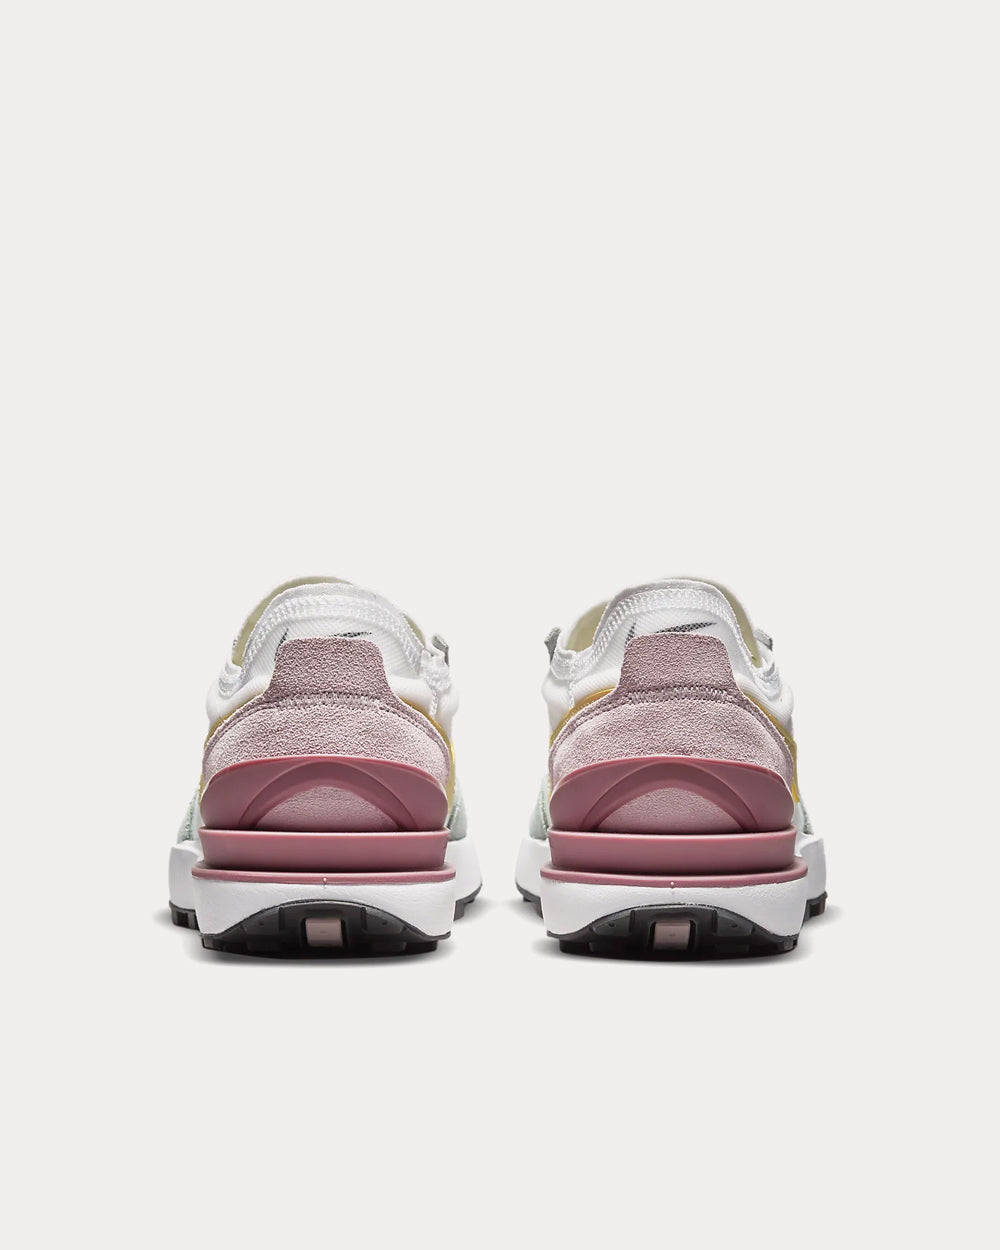 Nike - Waffle One White / Regal Pink / Light Mulberry / Lemon Drop Low Top Sneakers